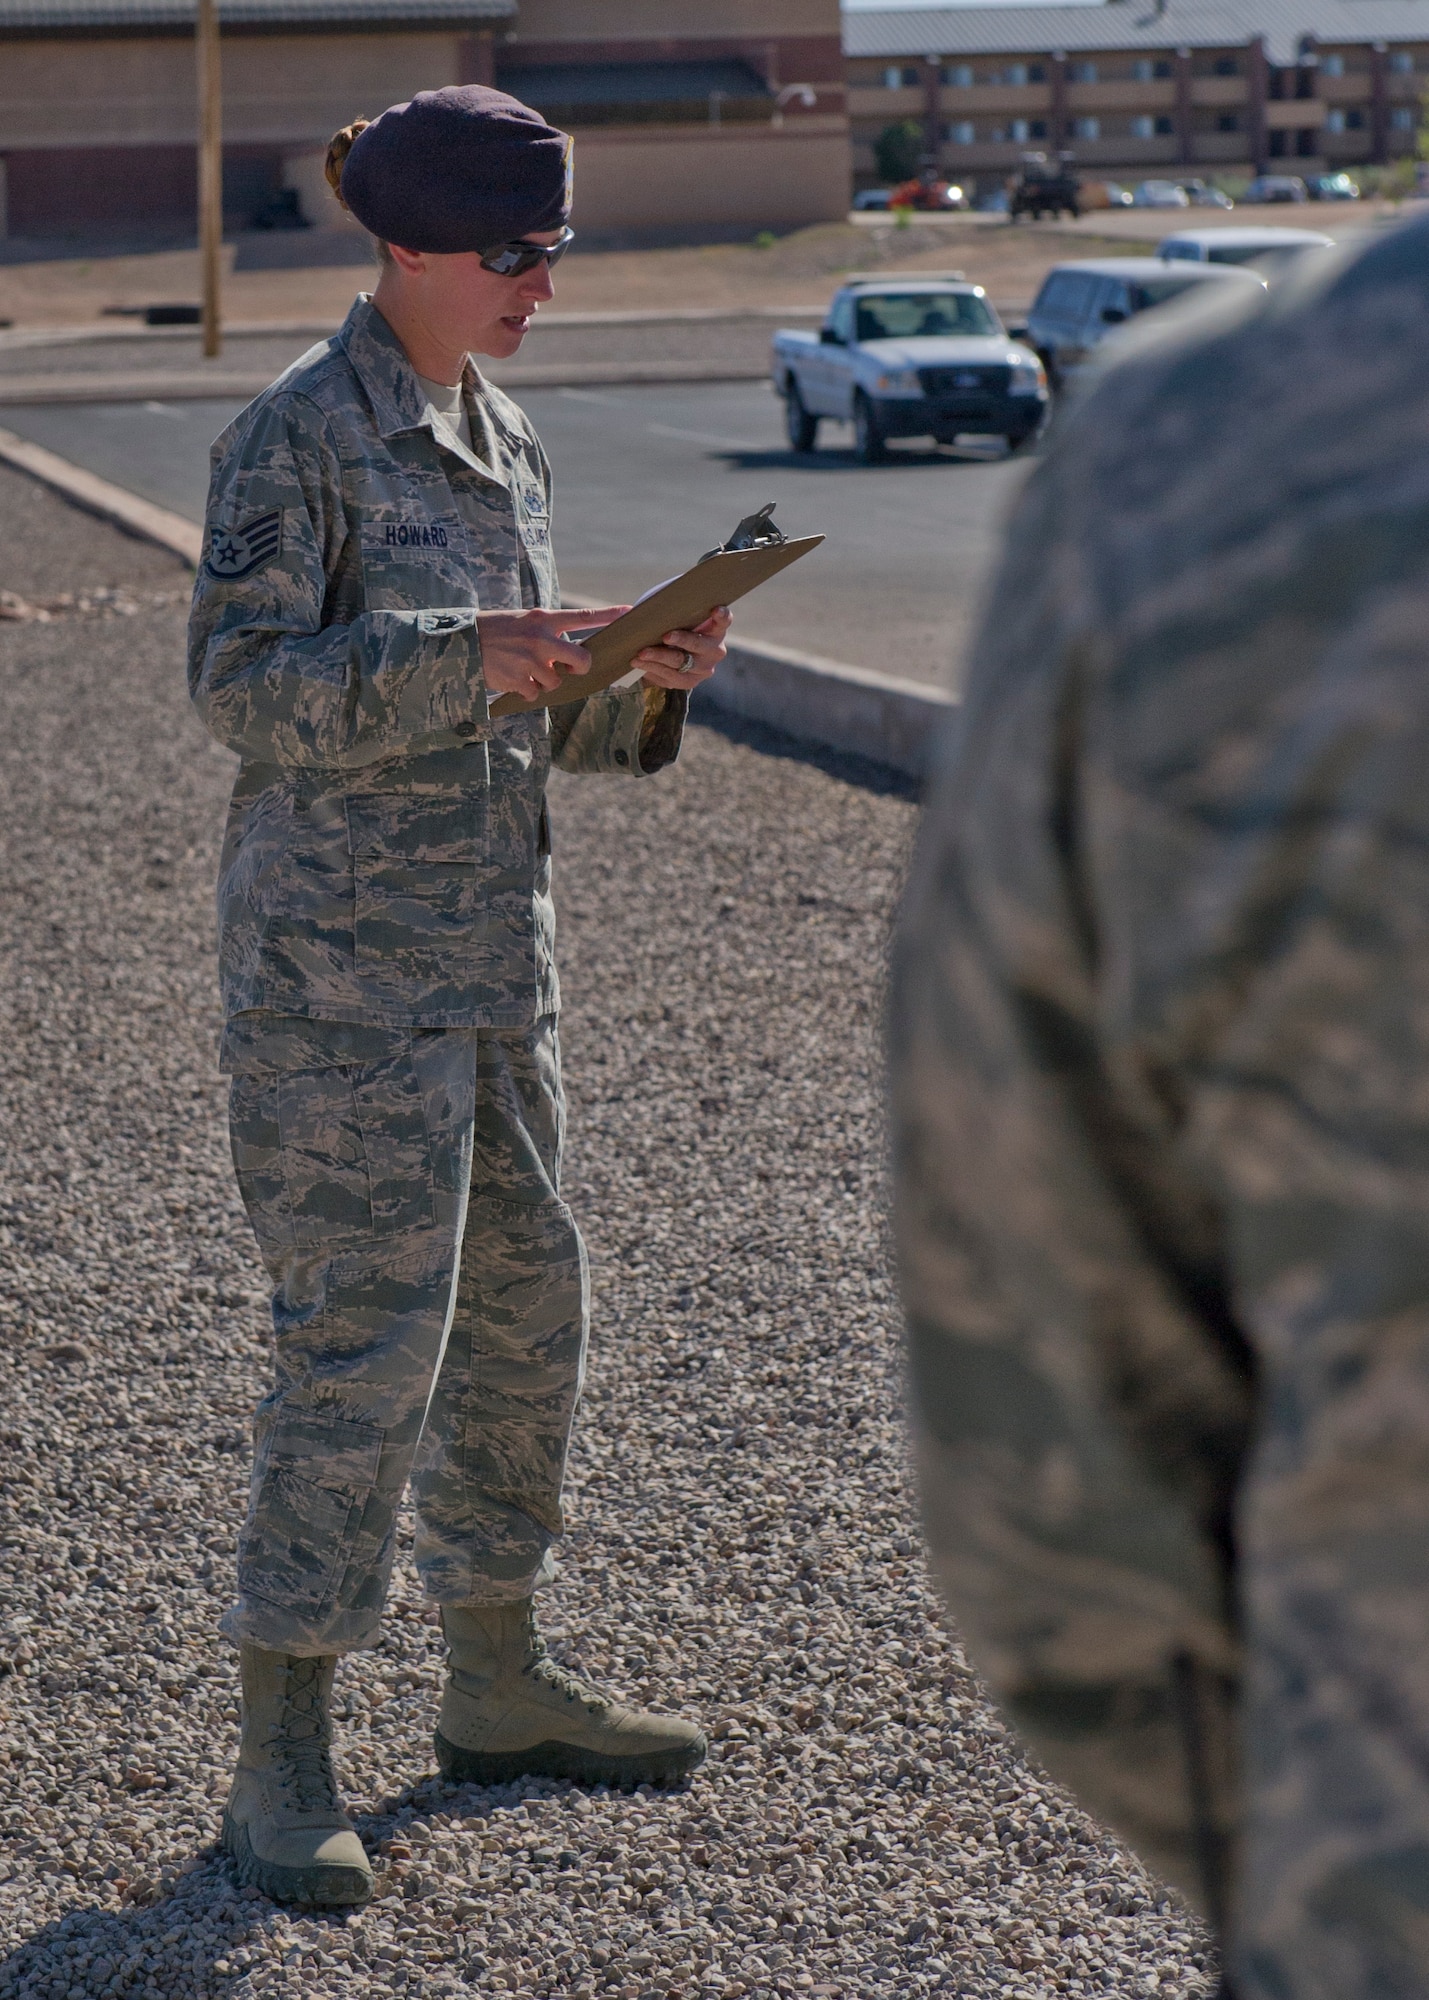 Staff Sgt. Alania Howard, 49th Security Forces Squadron duty position evaluator, reads memorandums from the President of the United States and the U.S. Gov. Susana Martinez of New Mexico addressing National Police Week at Holloman Air Force Base, N.M., May 12.  According to the National Police Week website, President John F.  Kennedy signed a proclamation in 1962 that designated May 15 as Peace Officers Memorial Day and the week in which that date falls as National Police Week.  Since the inception of National Police Week, the United States Air Force has lost 120 military and civilian law enforcement officers. (U.S. Air Force photo by Staff Sgt. E’Lysia Wray/Released)